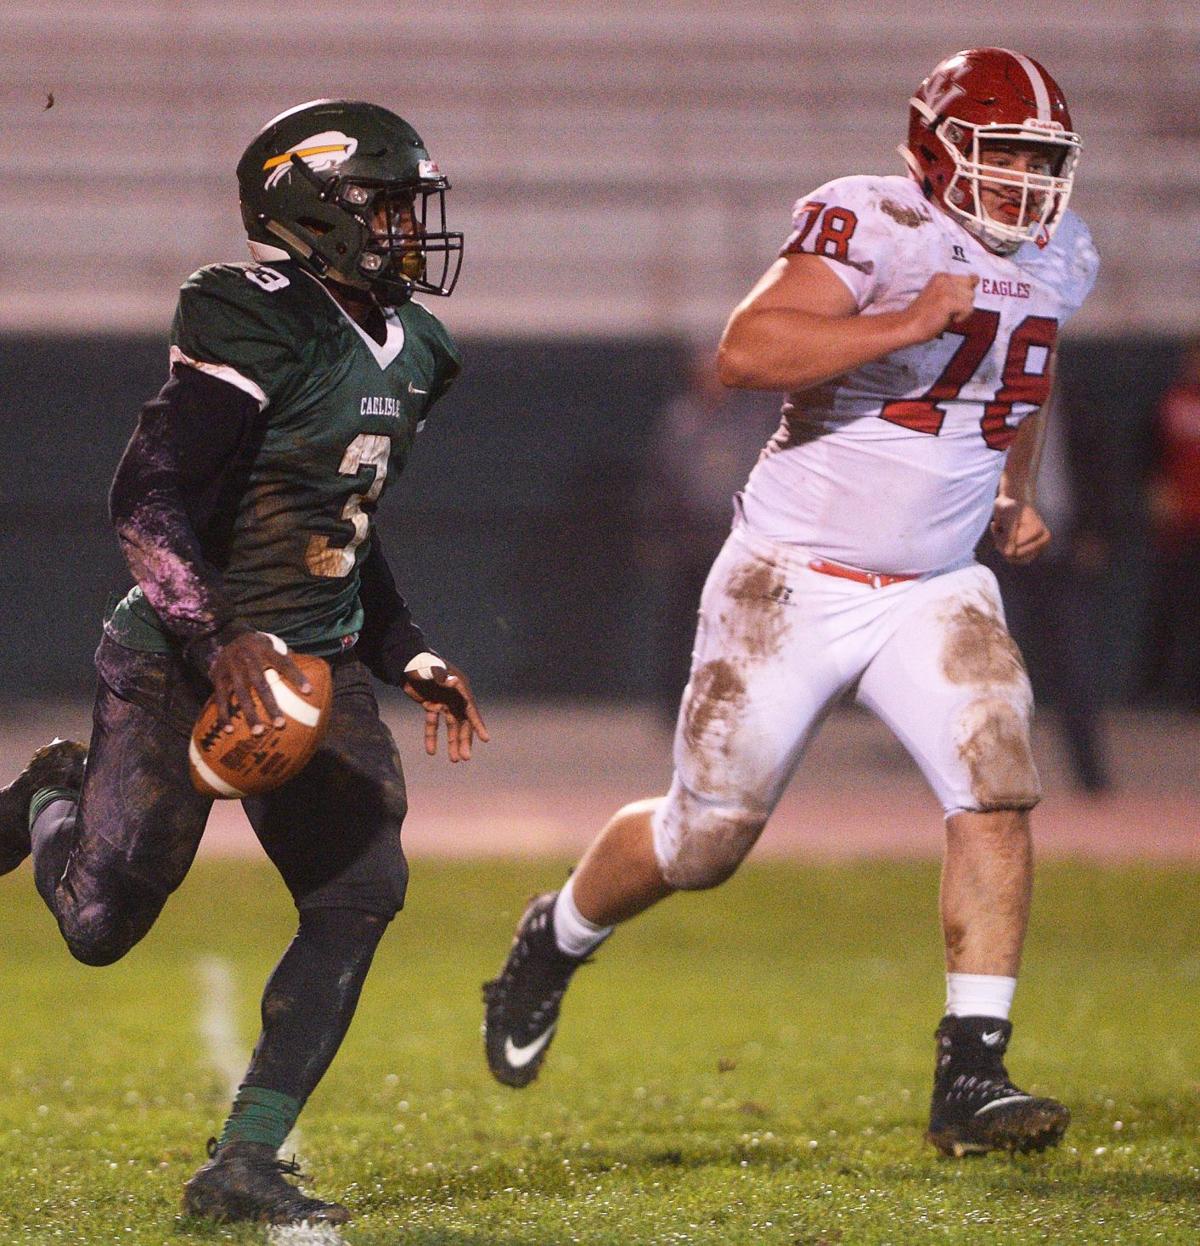 Cumberland Valley's Christian Arrington, Jacob Fetterolf to play in